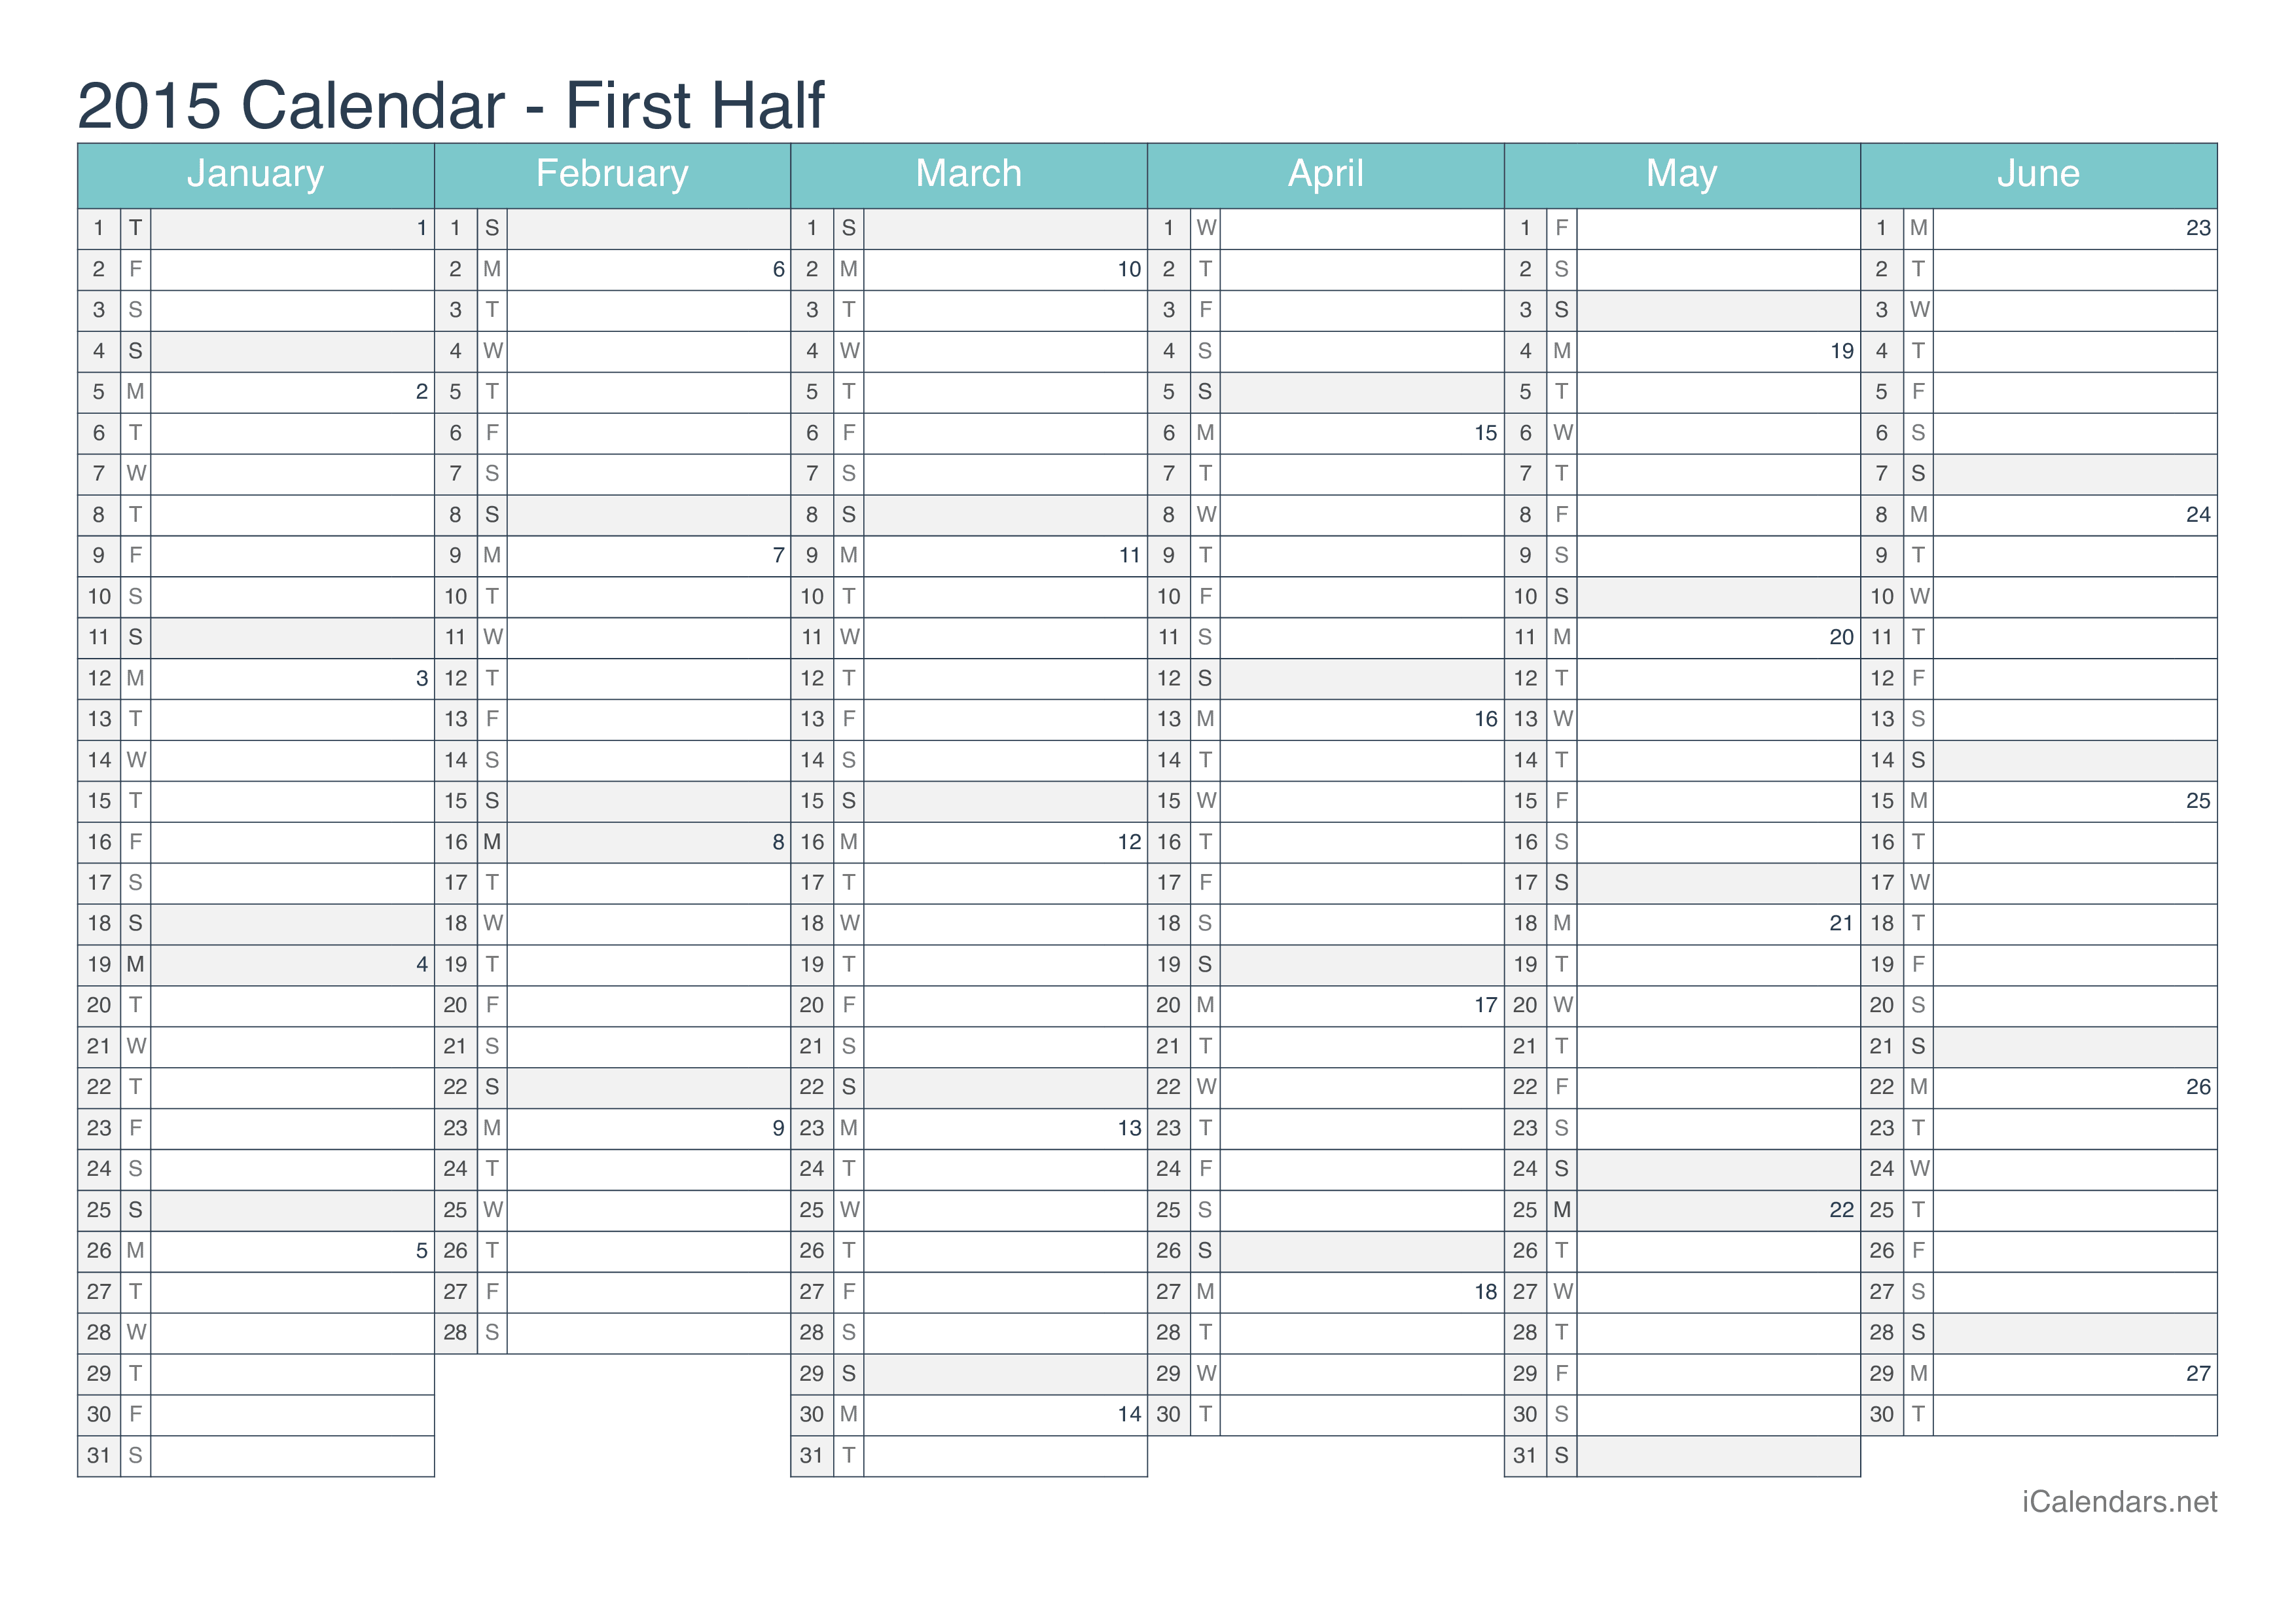 2015 Half year calendar with week numbers - Turquoise